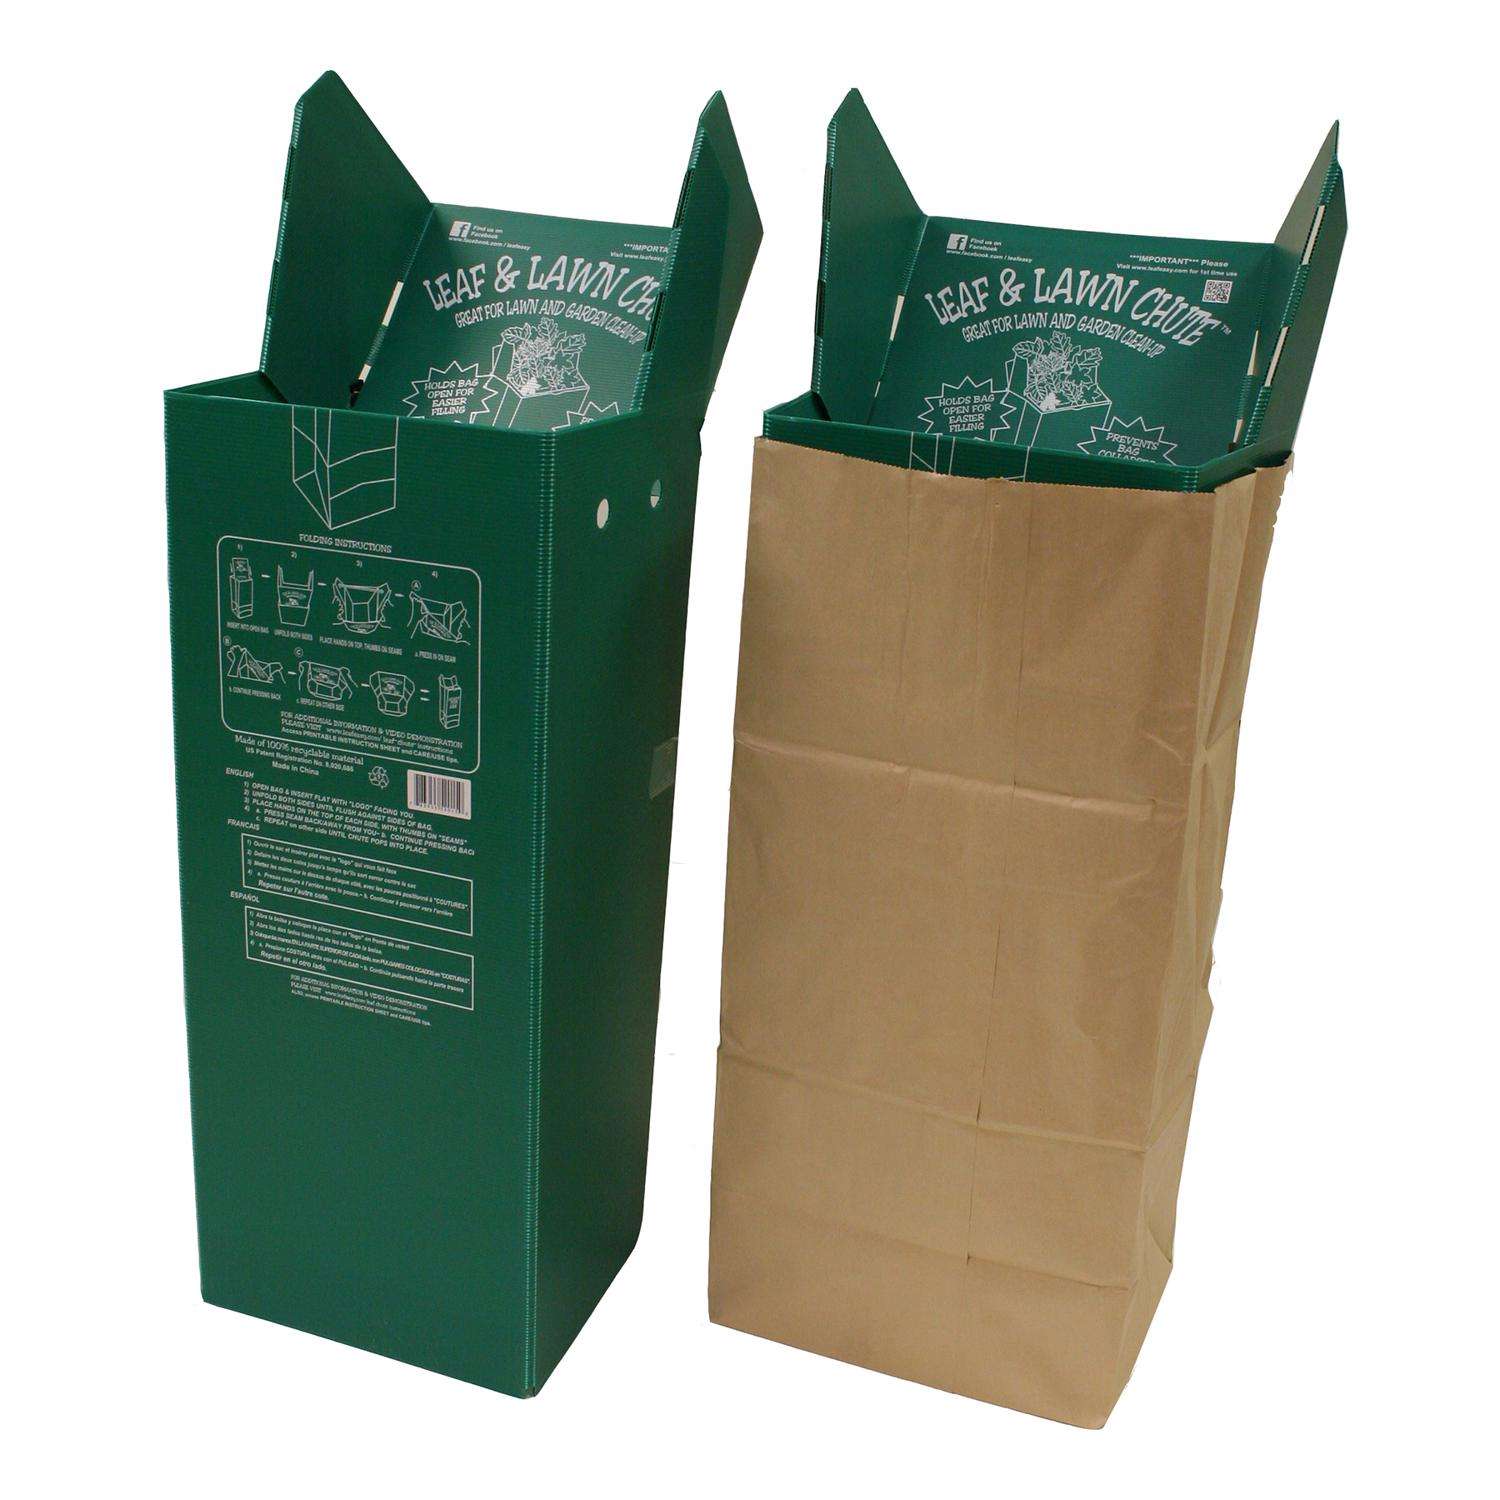 30 Gal. Paper Lawn and Leaf Bags - 5 Count